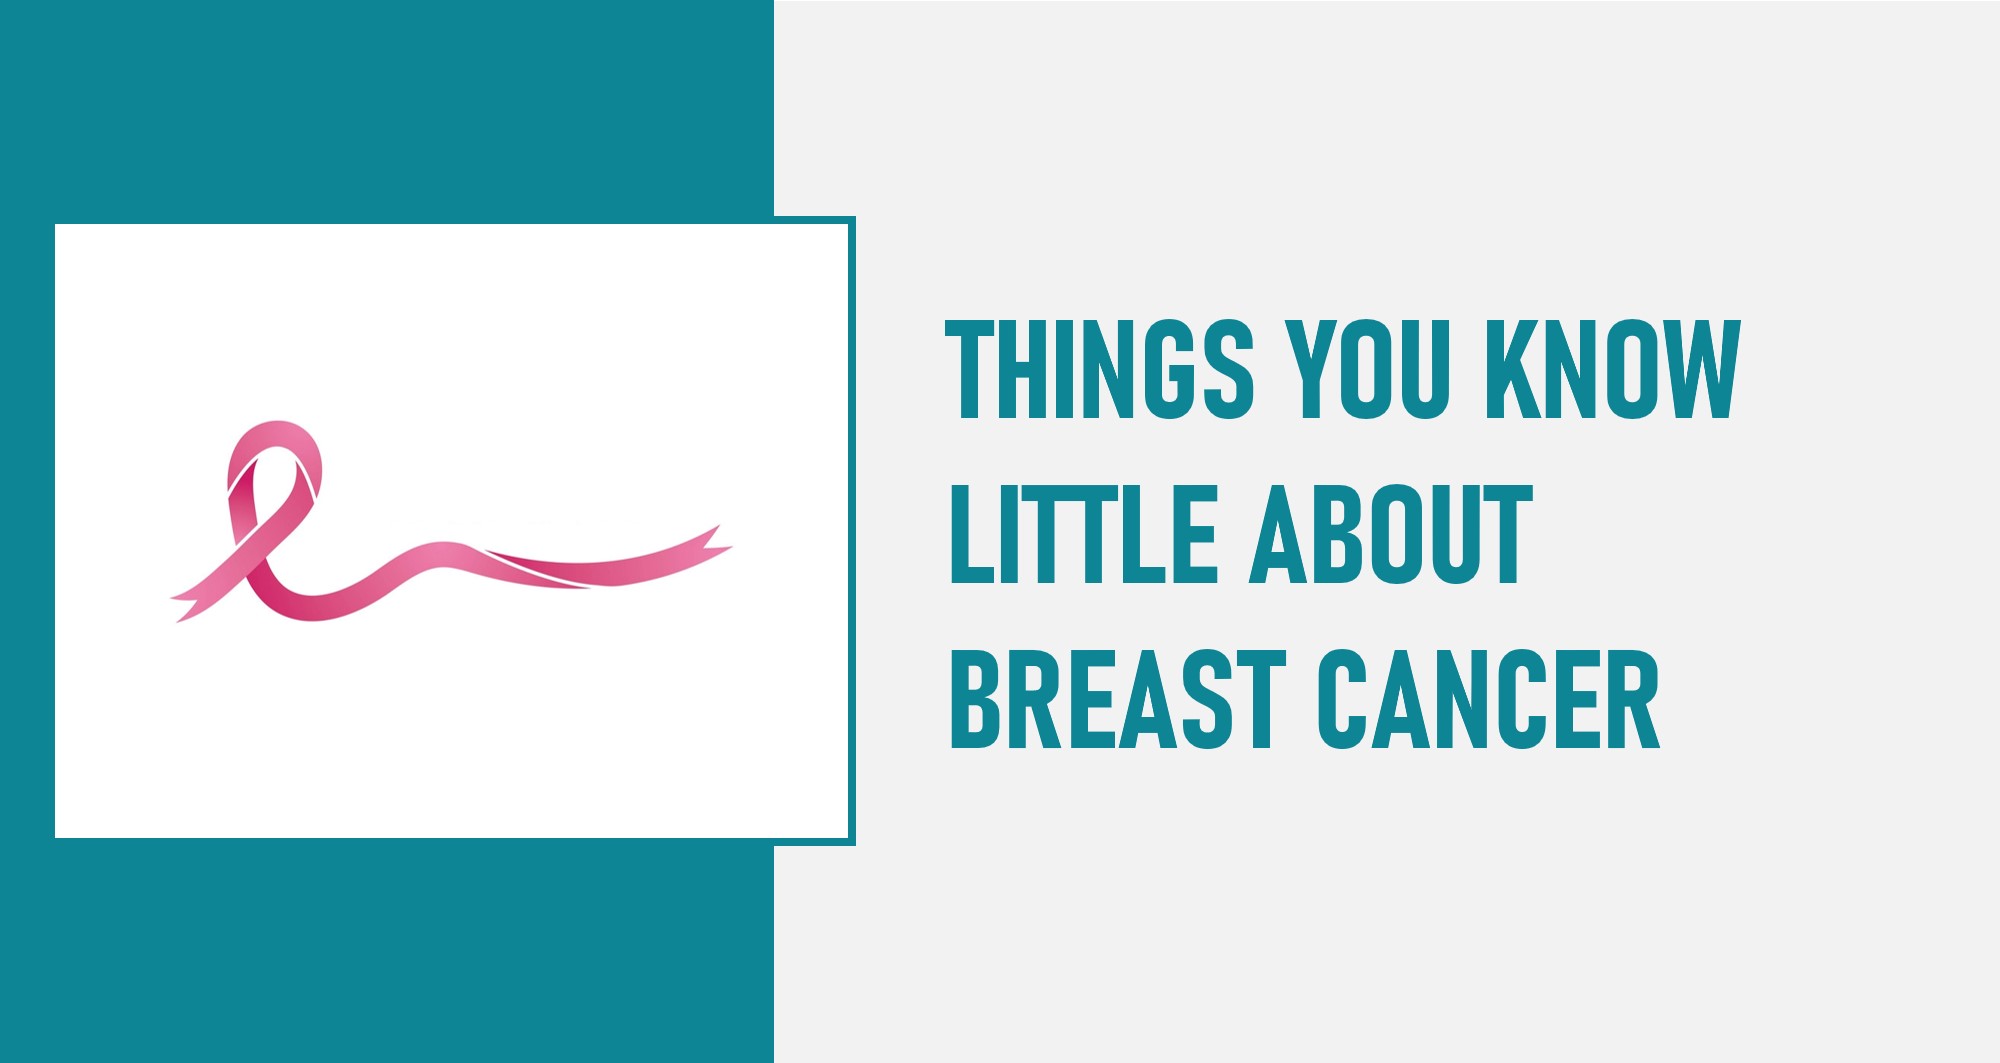 Things You Know Very Little about Breast Cancer